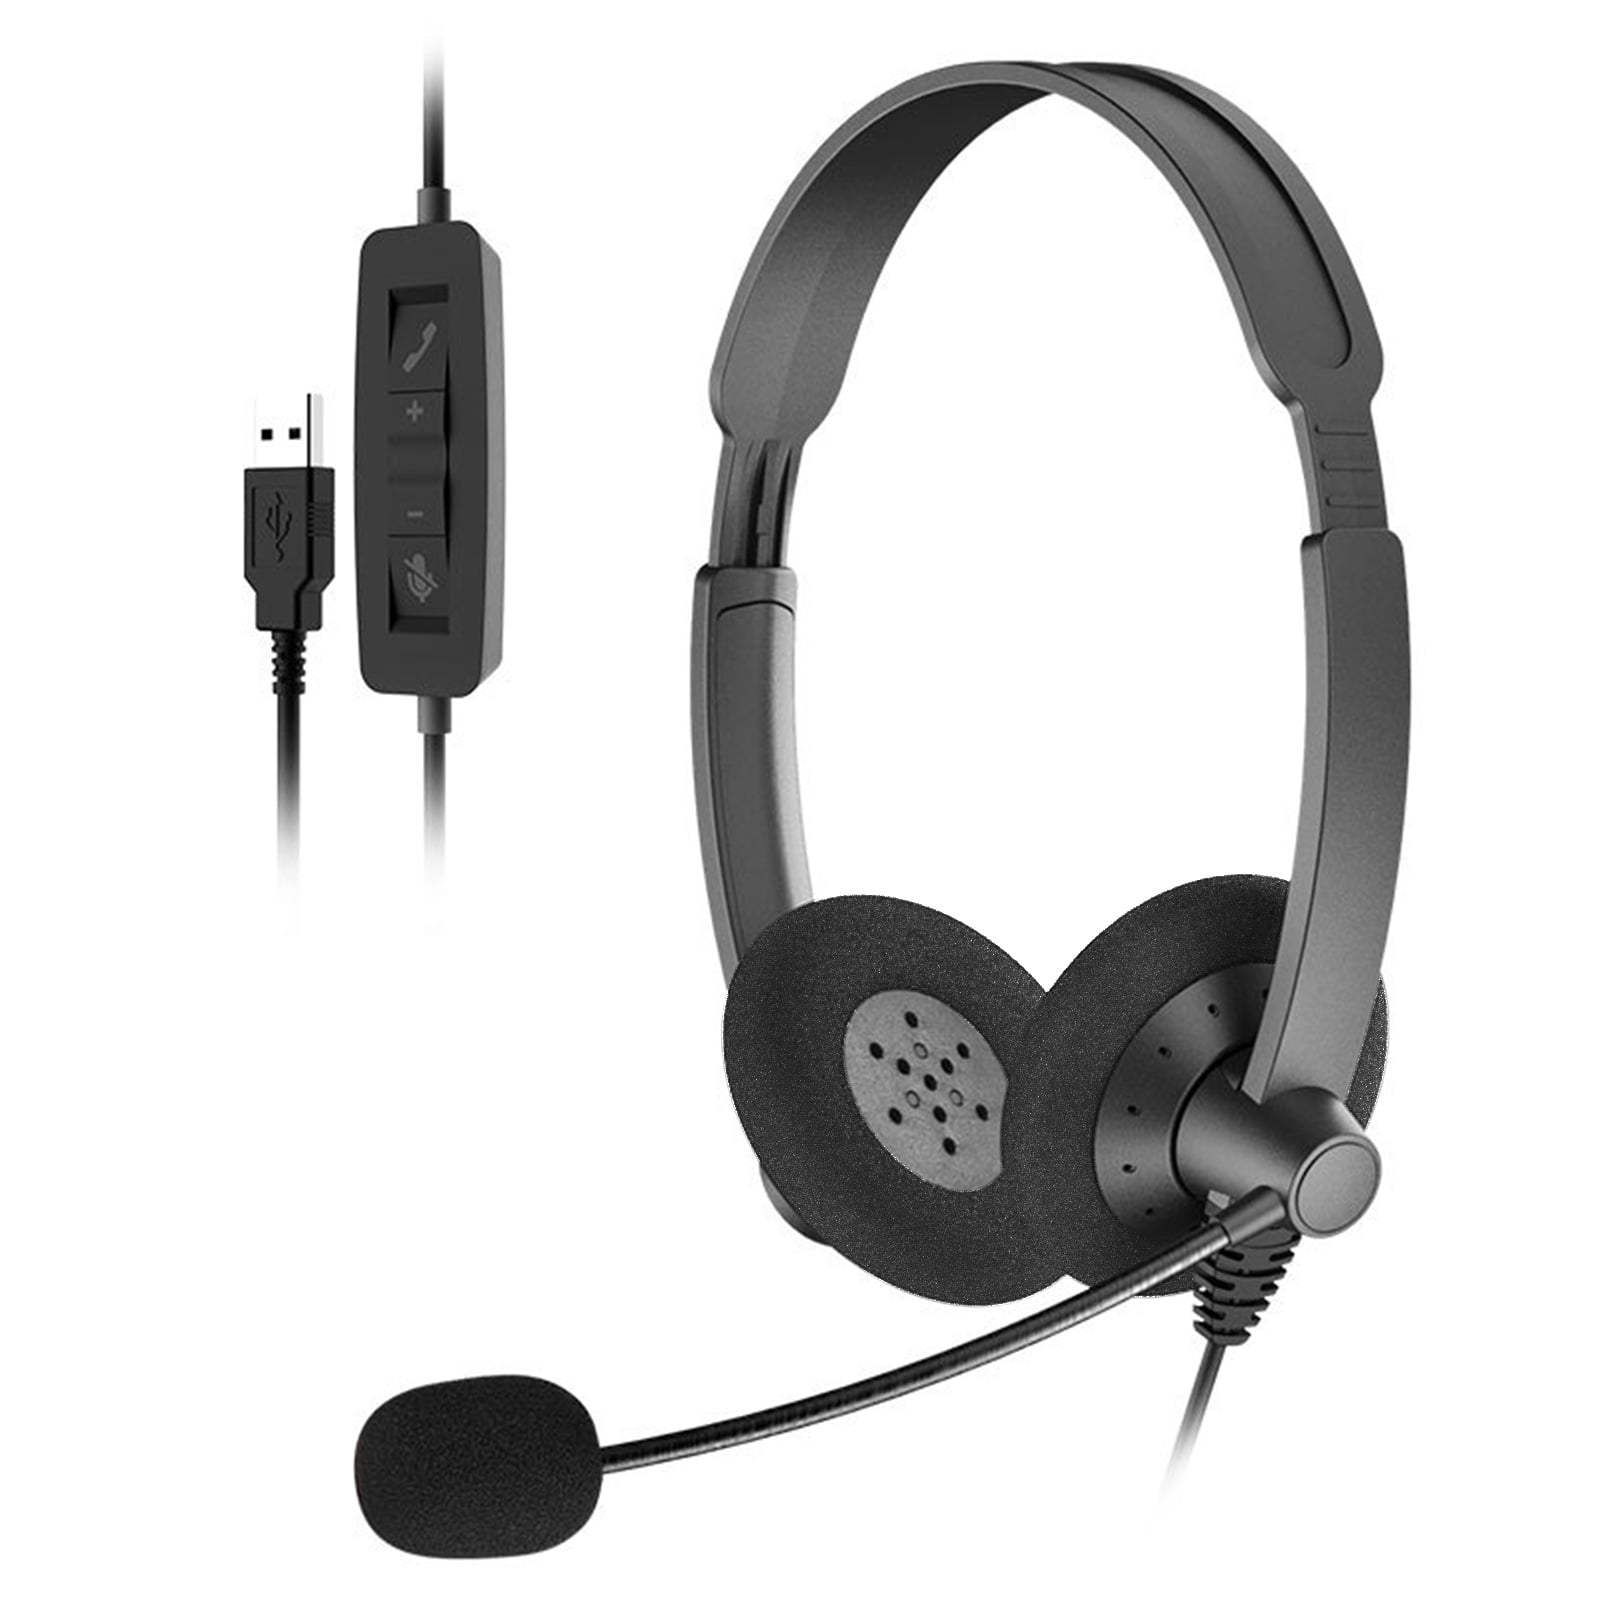 USB Headset with Microphone Hi-fi Stereo Computer Headphone with Noise Cancelling & in-line Call Controls Ultra Comfort 3.5mm Wired Headset for Skype Webinar Home Office 